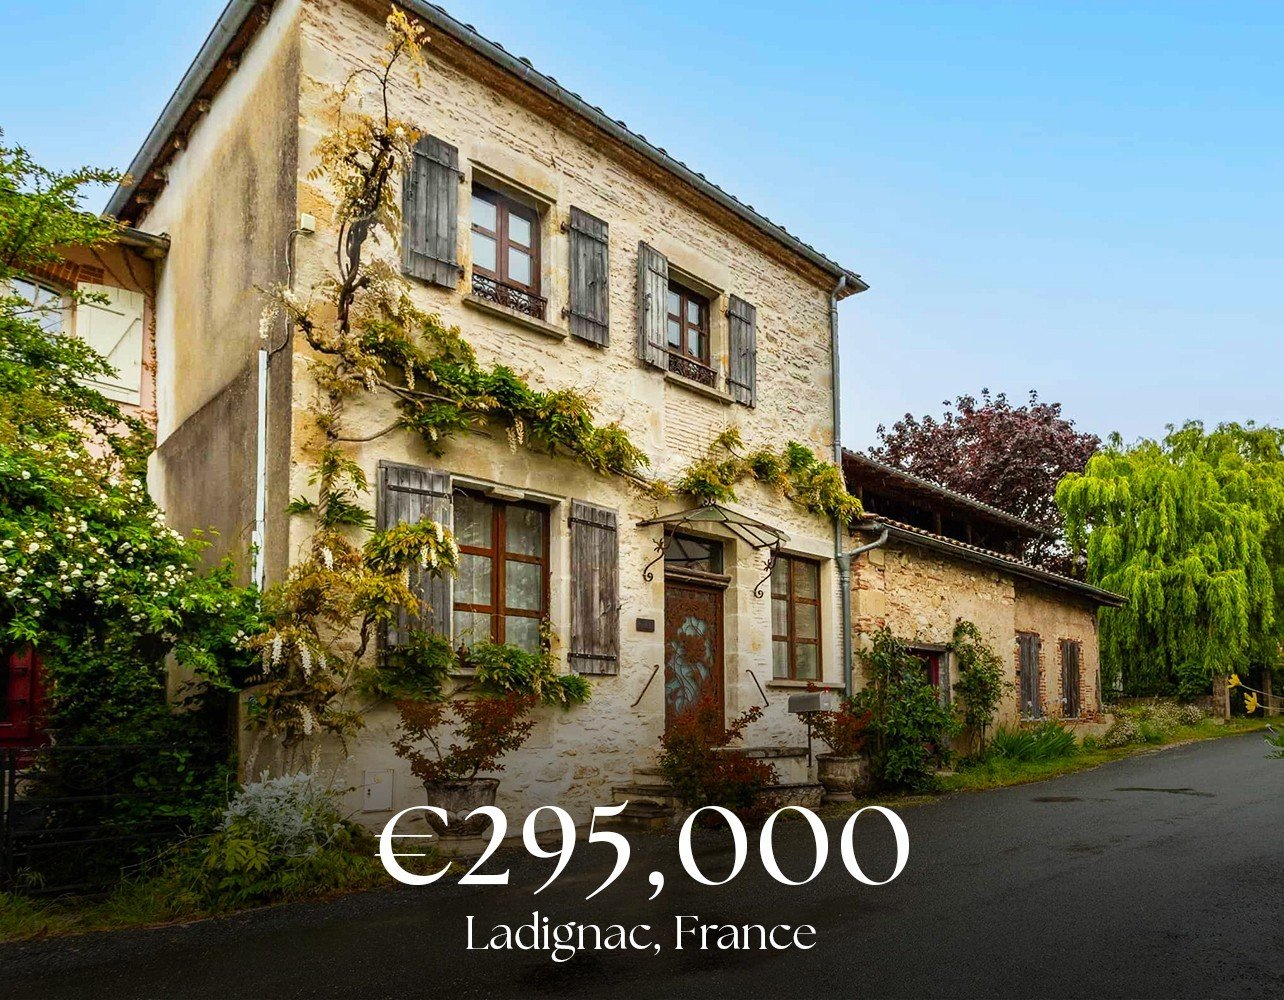 Step into the biggest surprise setting as you enter this enchanting village house nestled by the river Lot and a medieval chateau. The stone walls of this 130 sqm, 3 bedroom whisper tales of yesteryears, while the contemporary interiors add a touch o